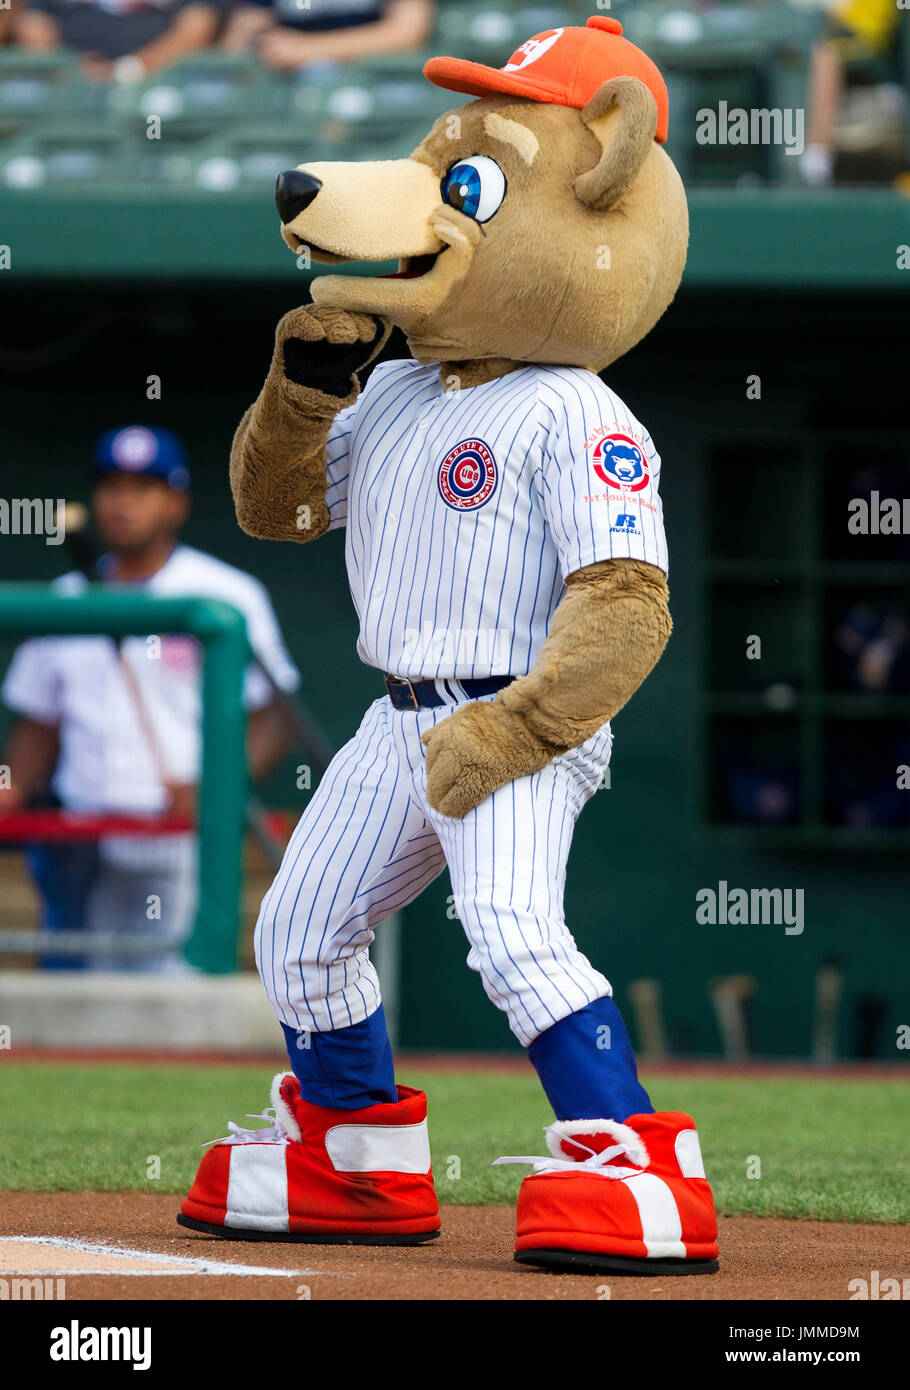 South Bend, Indiana, USA. 27th July, 2017. South Bend Cubs mascot Stu  during MILB game action between the South Bend Cubs and the Lake County  Captains at Four Winds Field in South